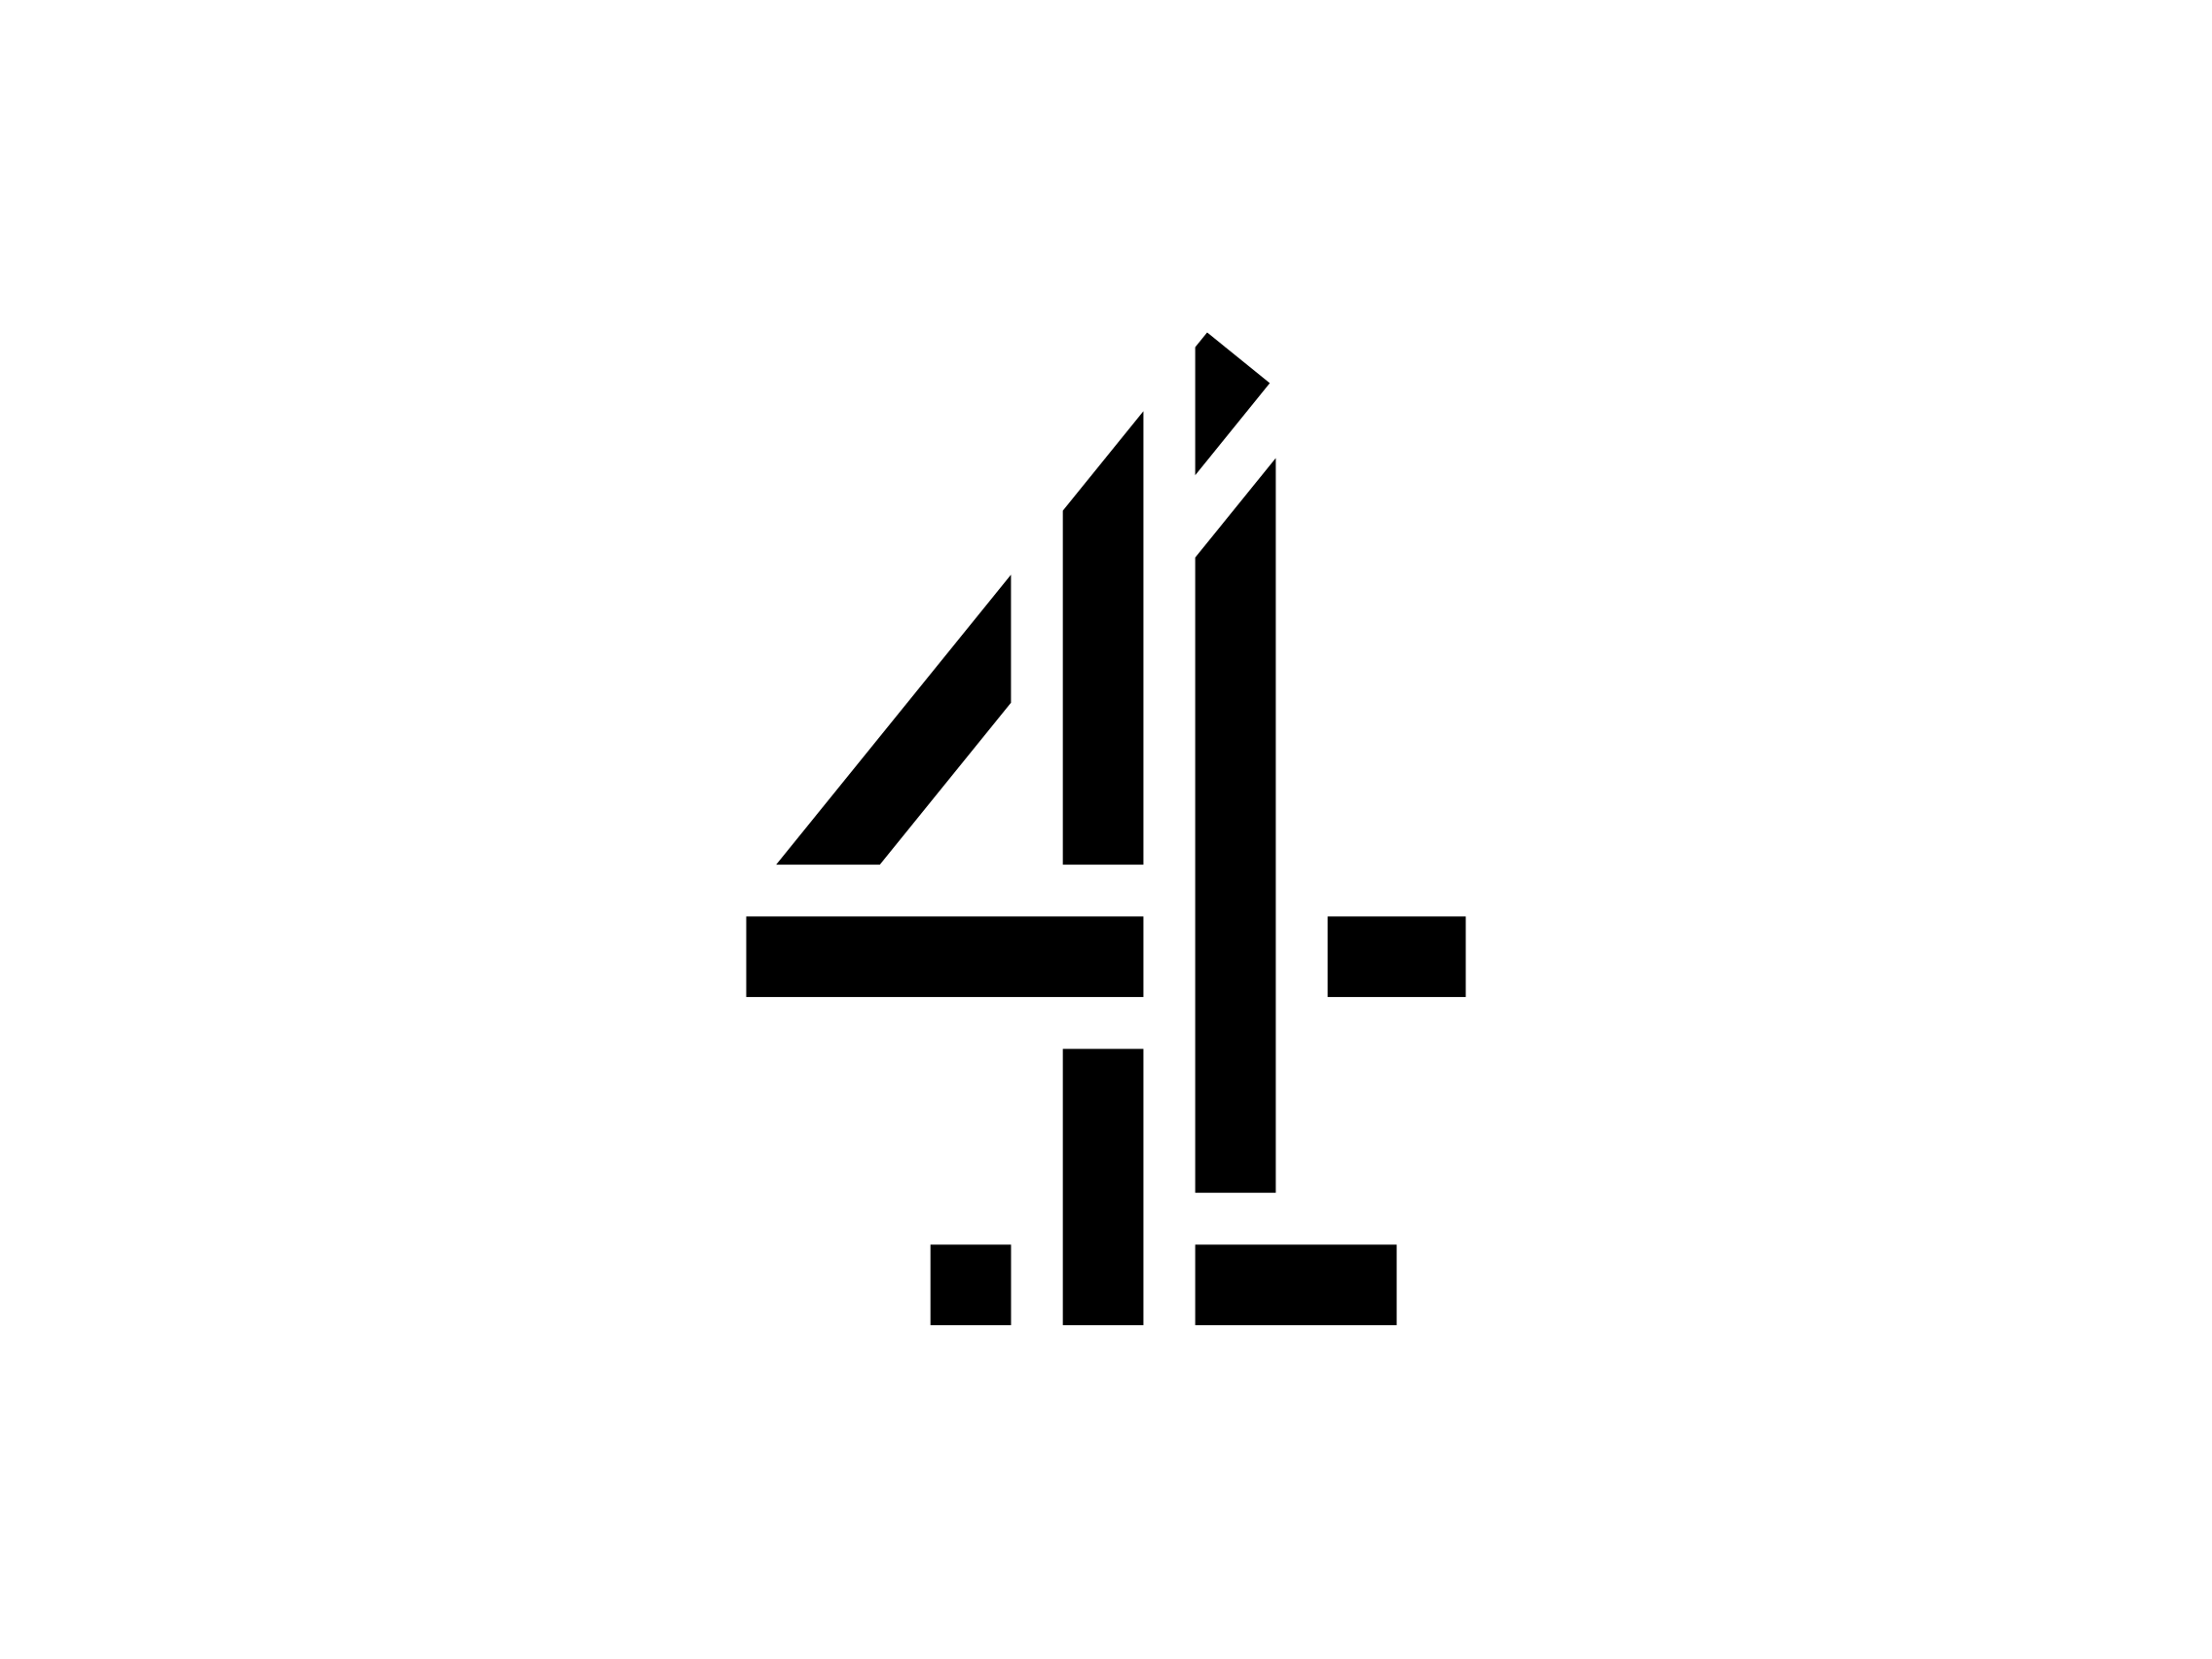 Channel 4 Logo - Channel-4-logo-2015 | Aspiring Solicitors - Law Careers Diversity Advice